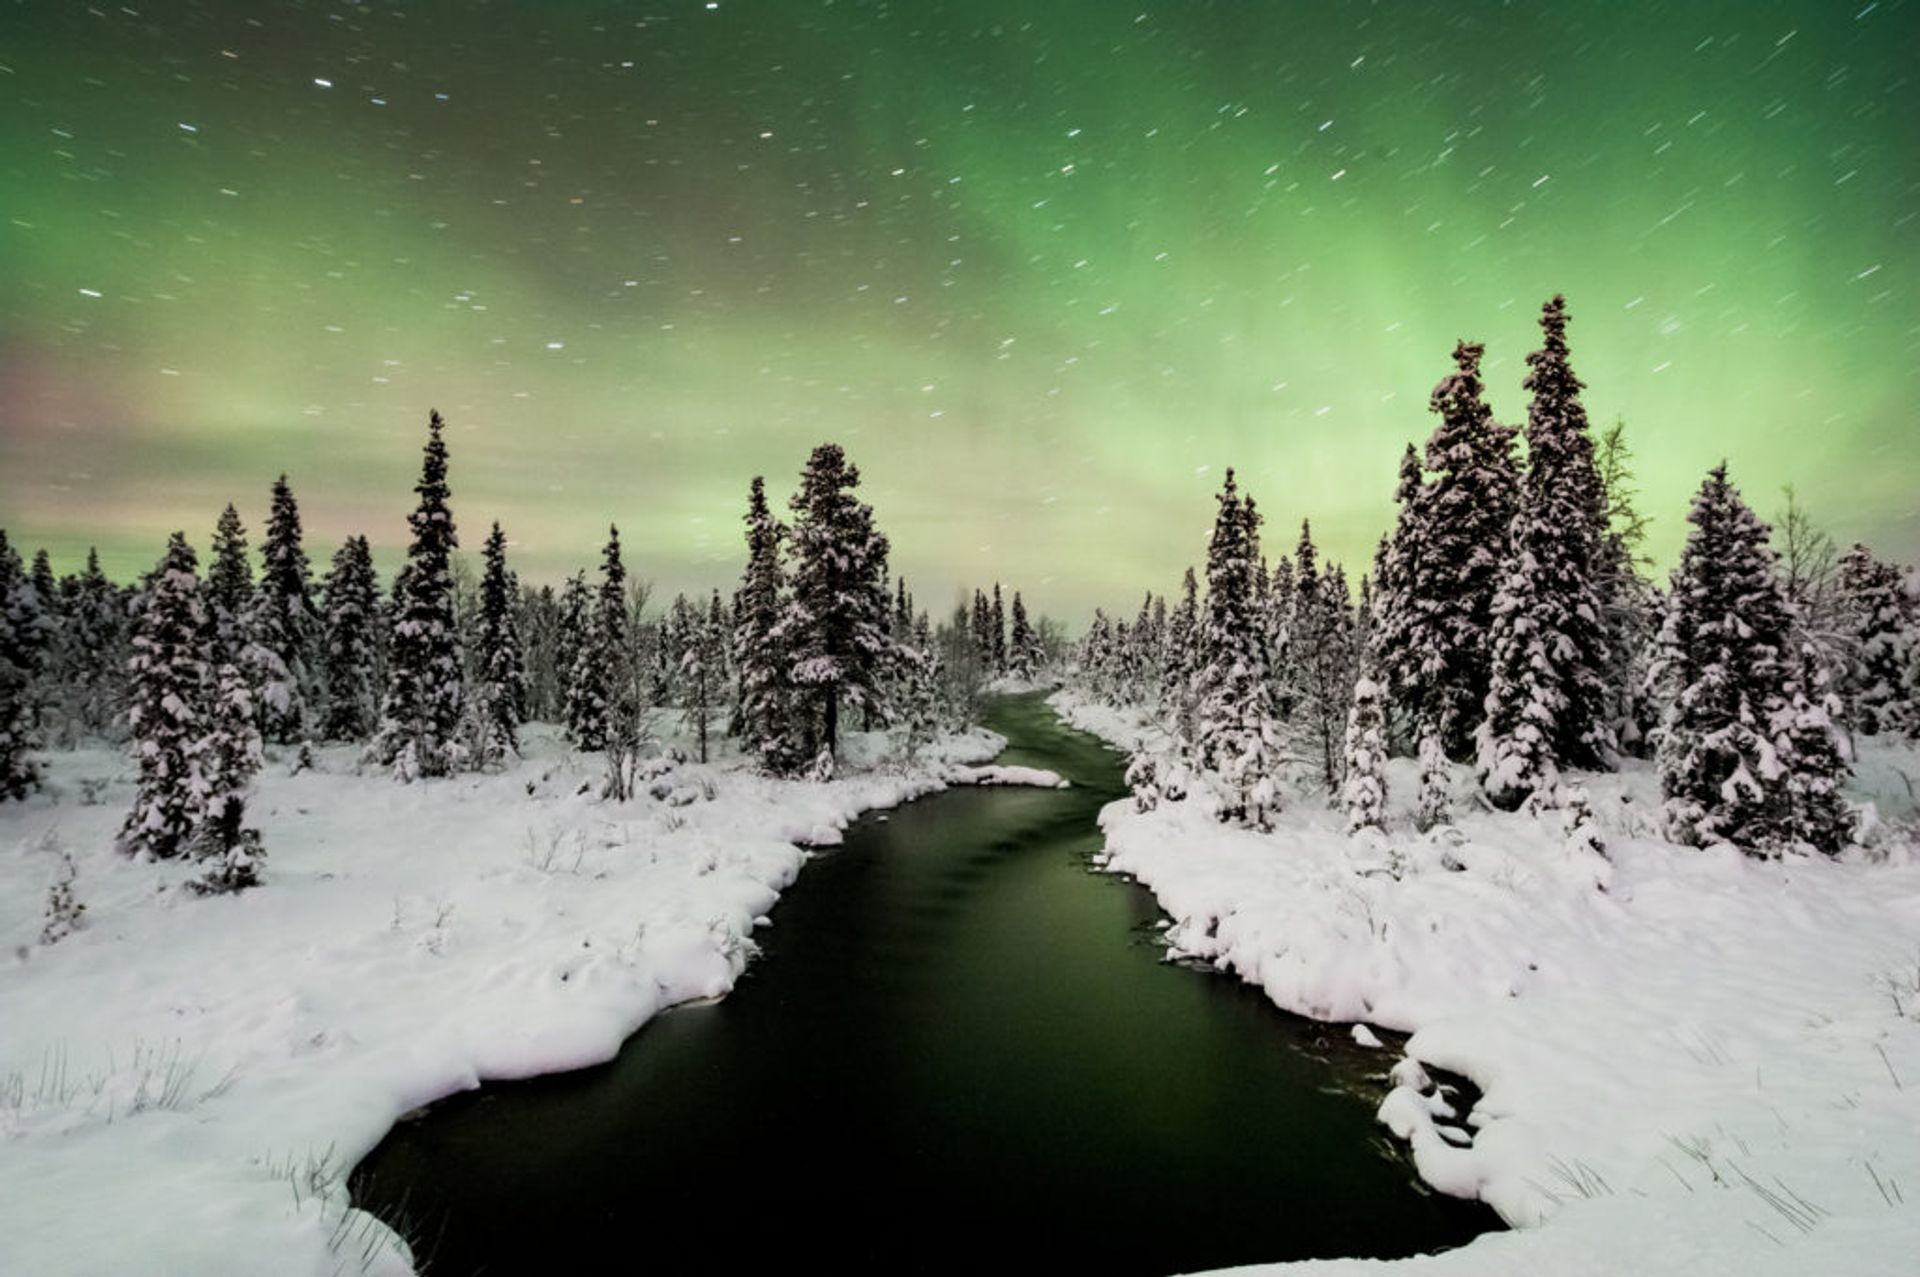 Northern Lights above a snowy forest.